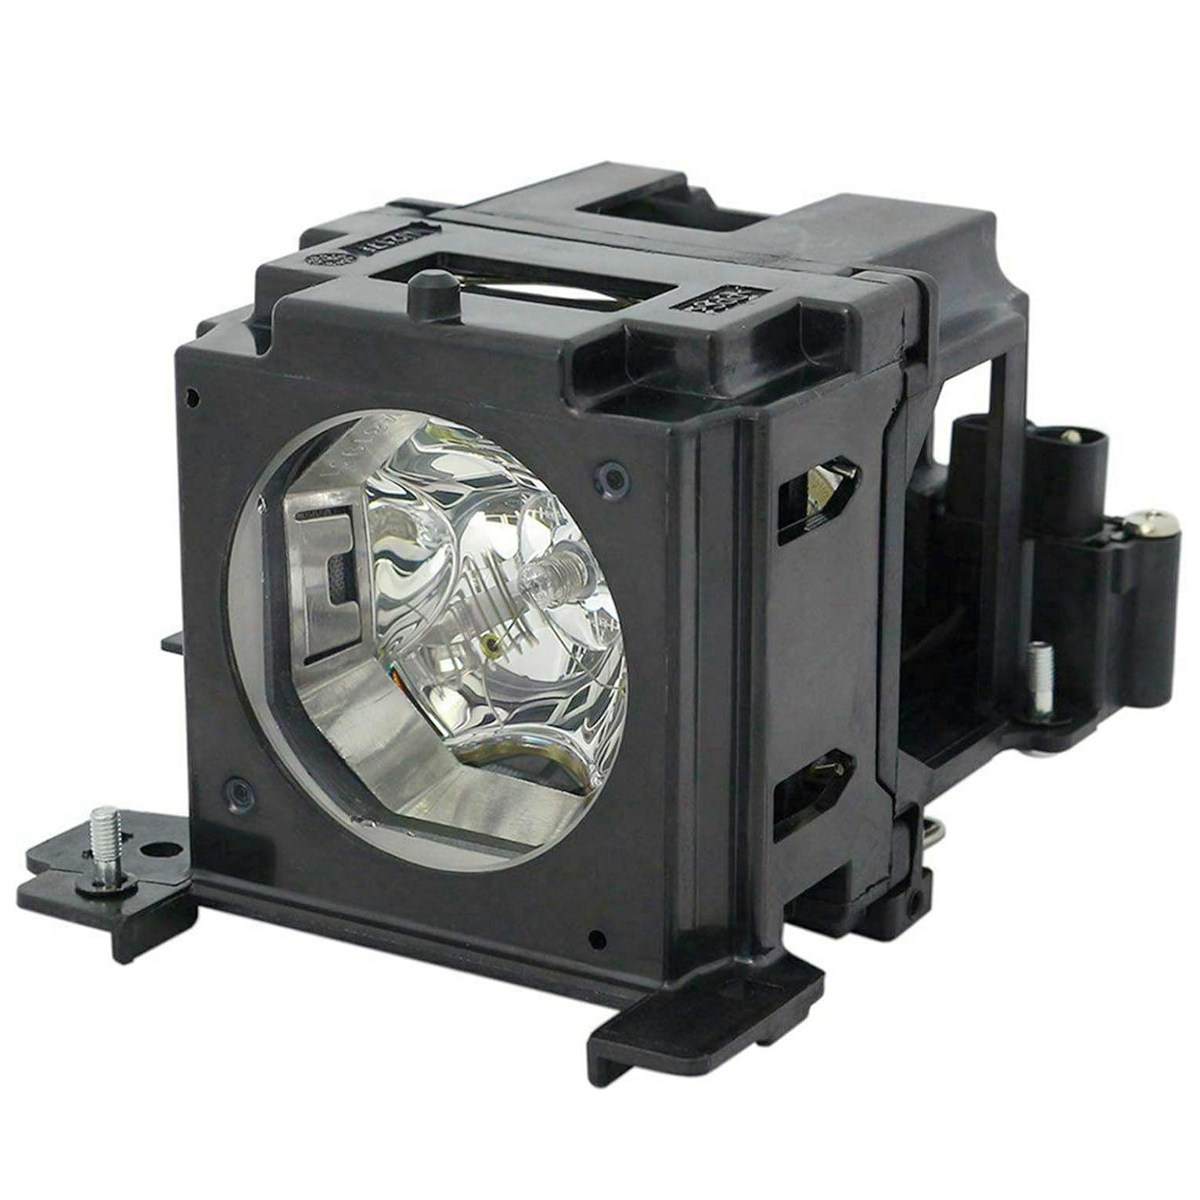 Replacement Projector lamp DT00301 For Hitachi CP-S220 CP-S220A CP-S270 CP-X270